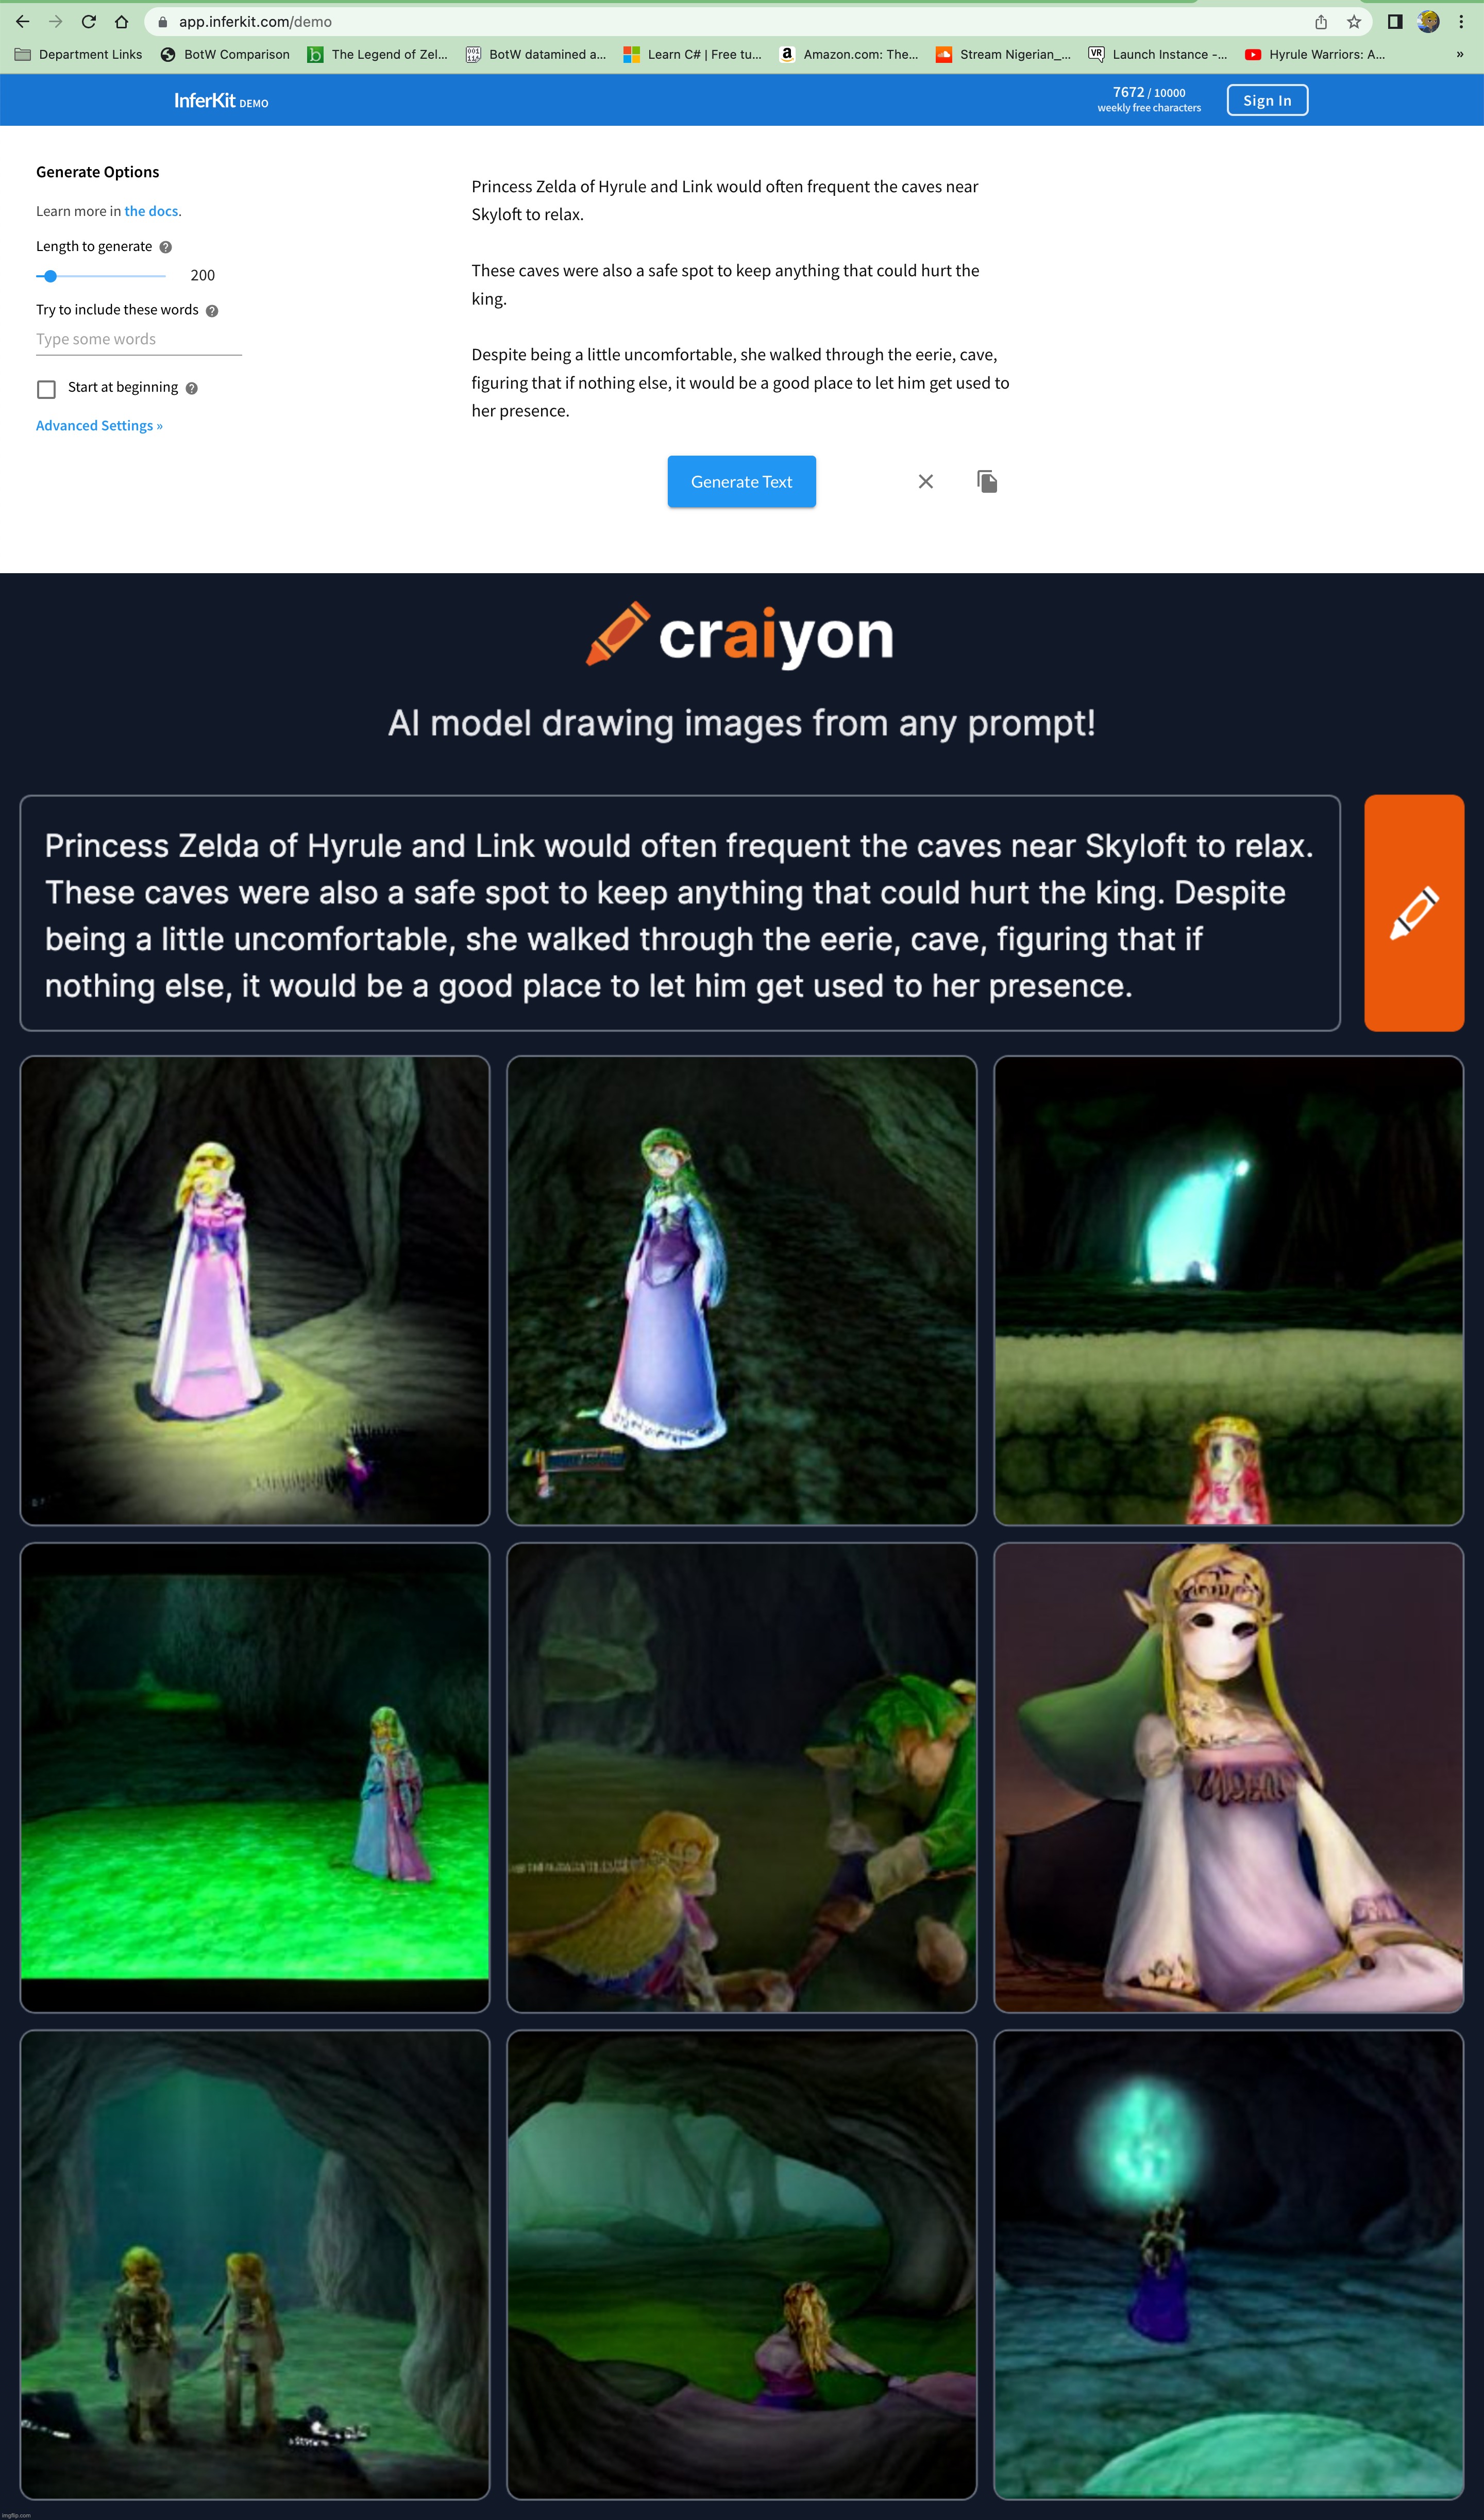 Princess Zelda of Hyrule and Link would often frequent the caves near Skyloft to relax.  These caves were also a safe spot to ke | image tagged in craiyon,inferkit,ai meme,drawing,zelda,link | made w/ Imgflip meme maker